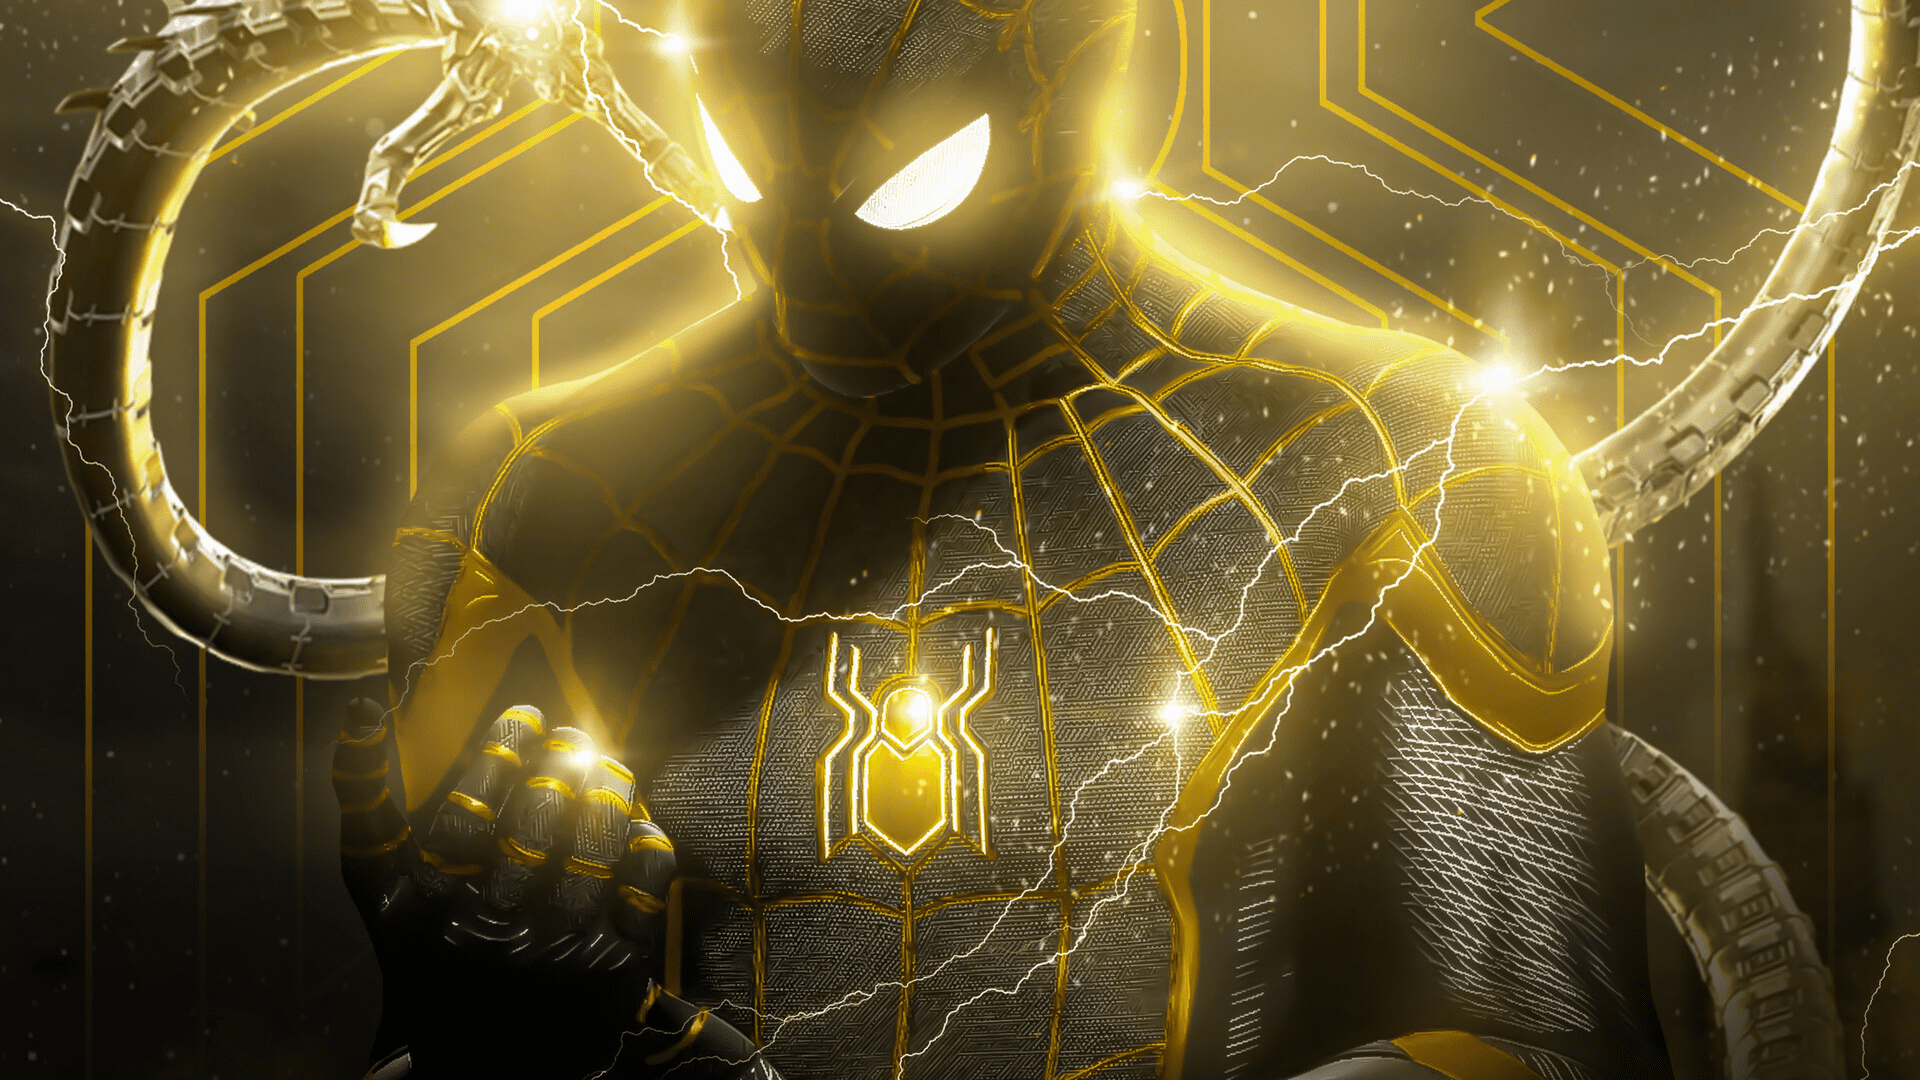 Cool Spider Wallpapers